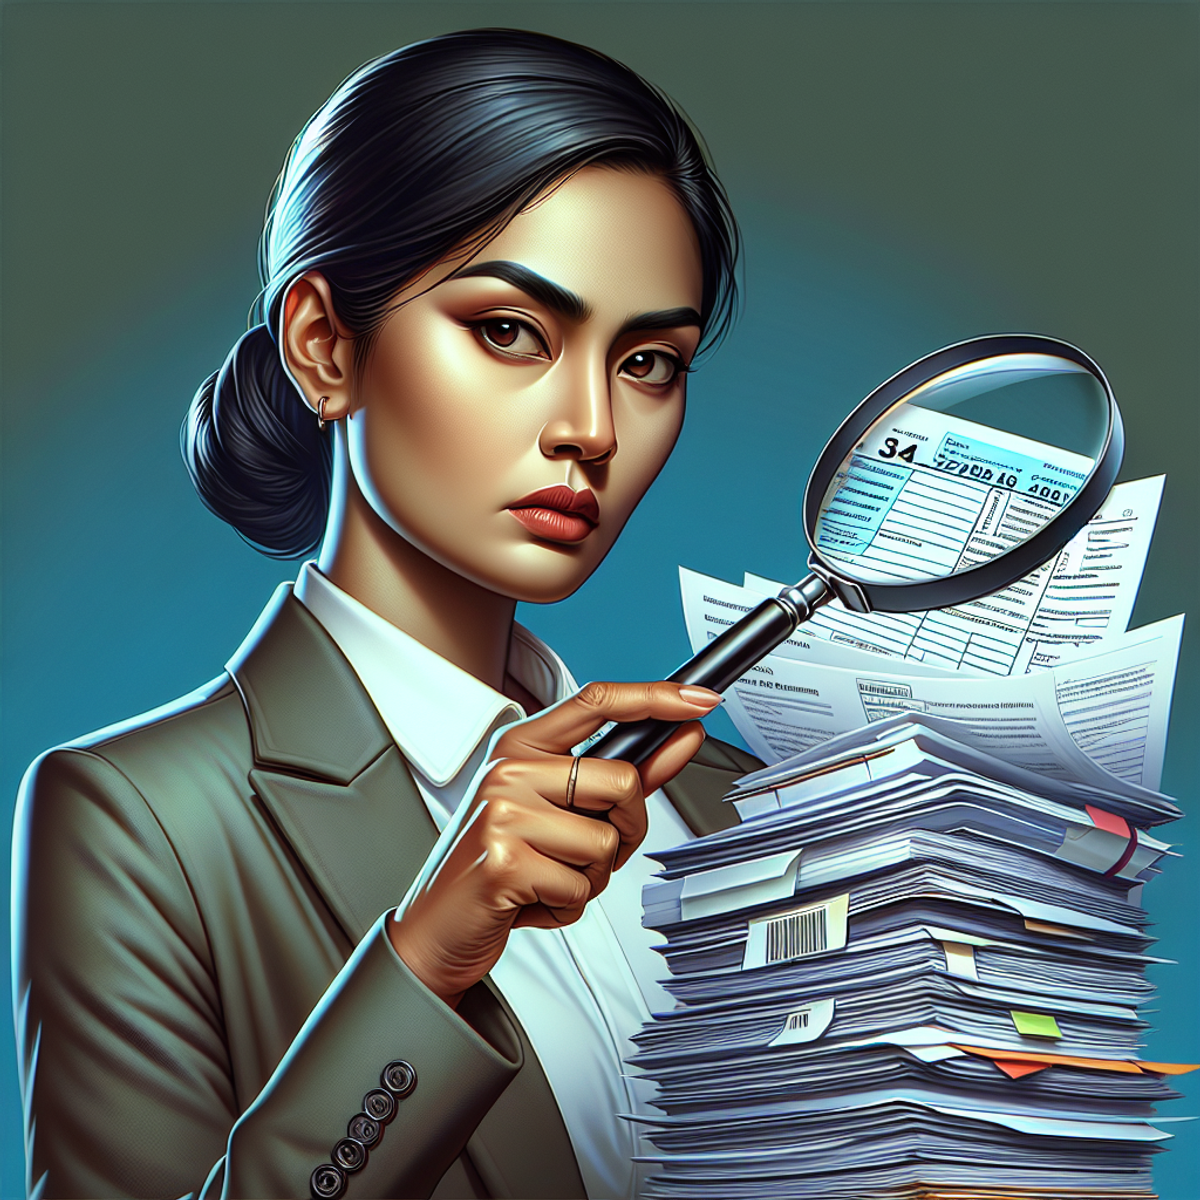 A South Asian woman holding a magnifying glass over a stack of documents.